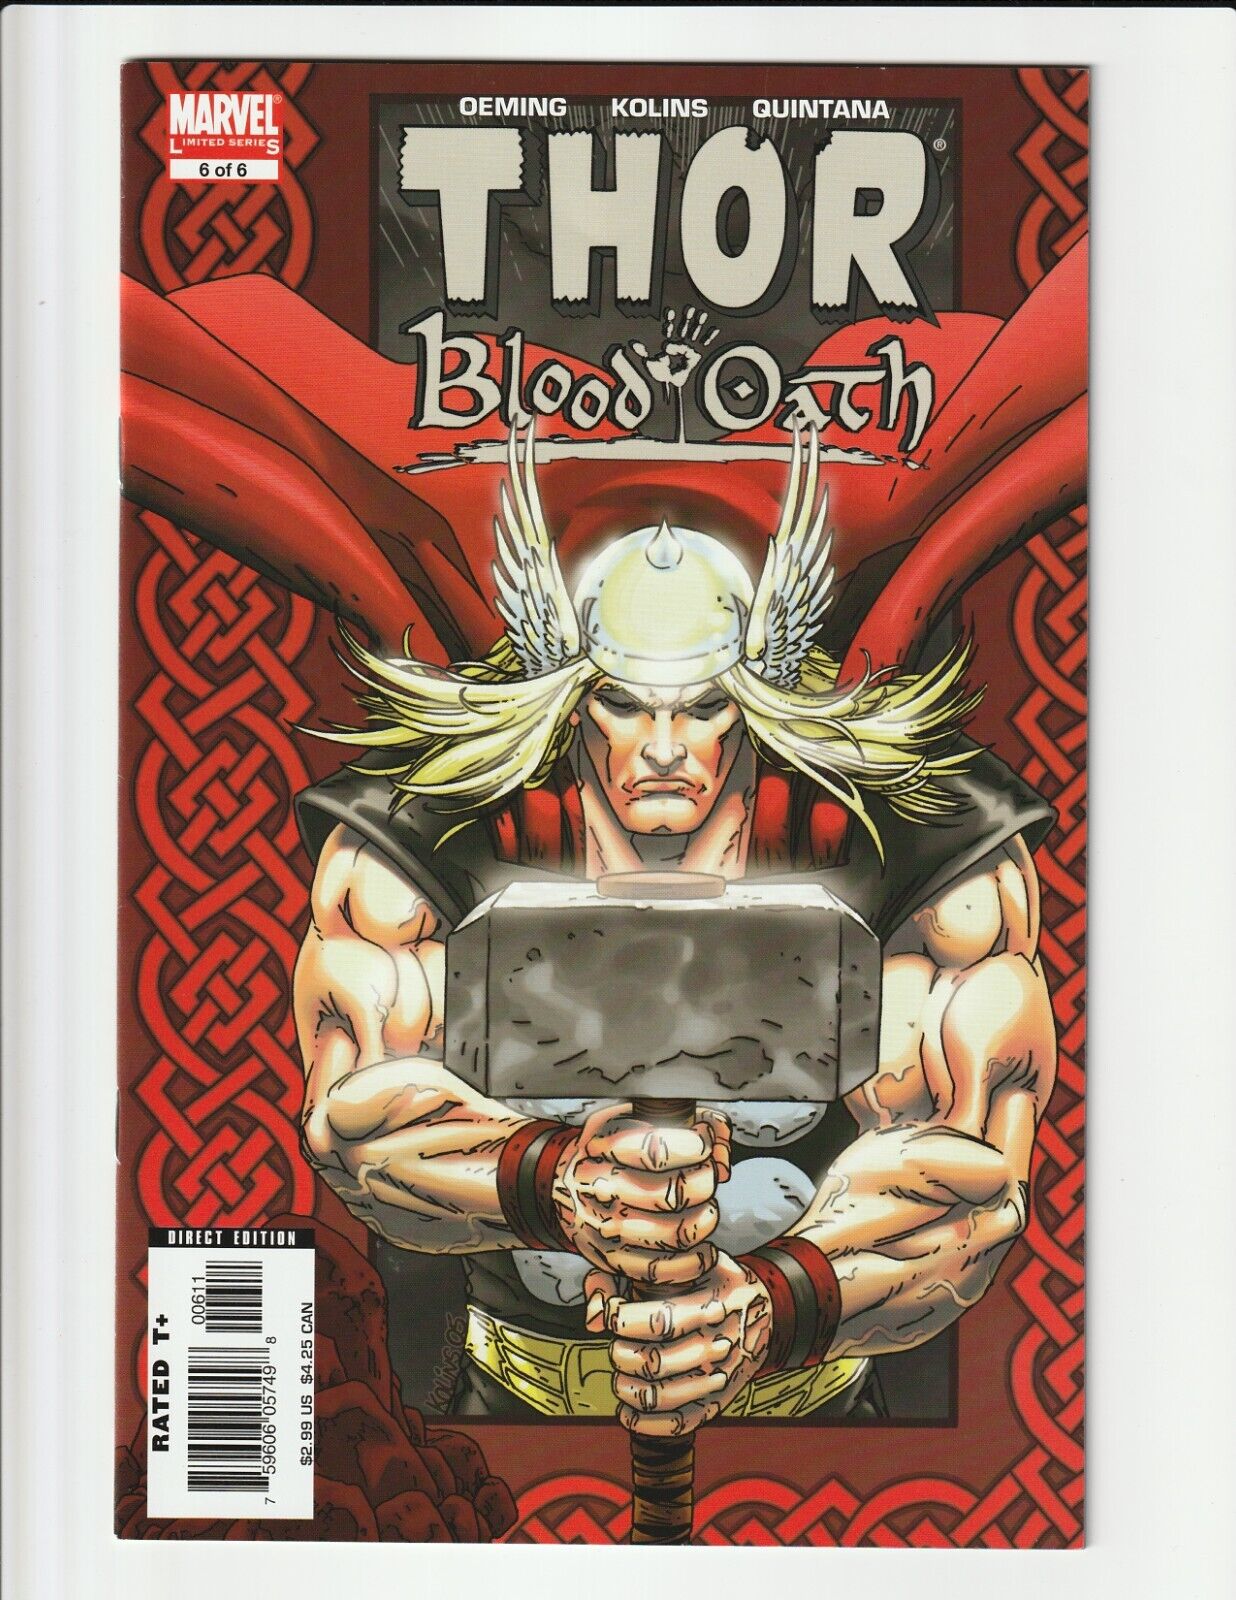 THOR BLOOD OATH #6 (2005) NM- FIRST APPEARANCE OF MIKABOSHI